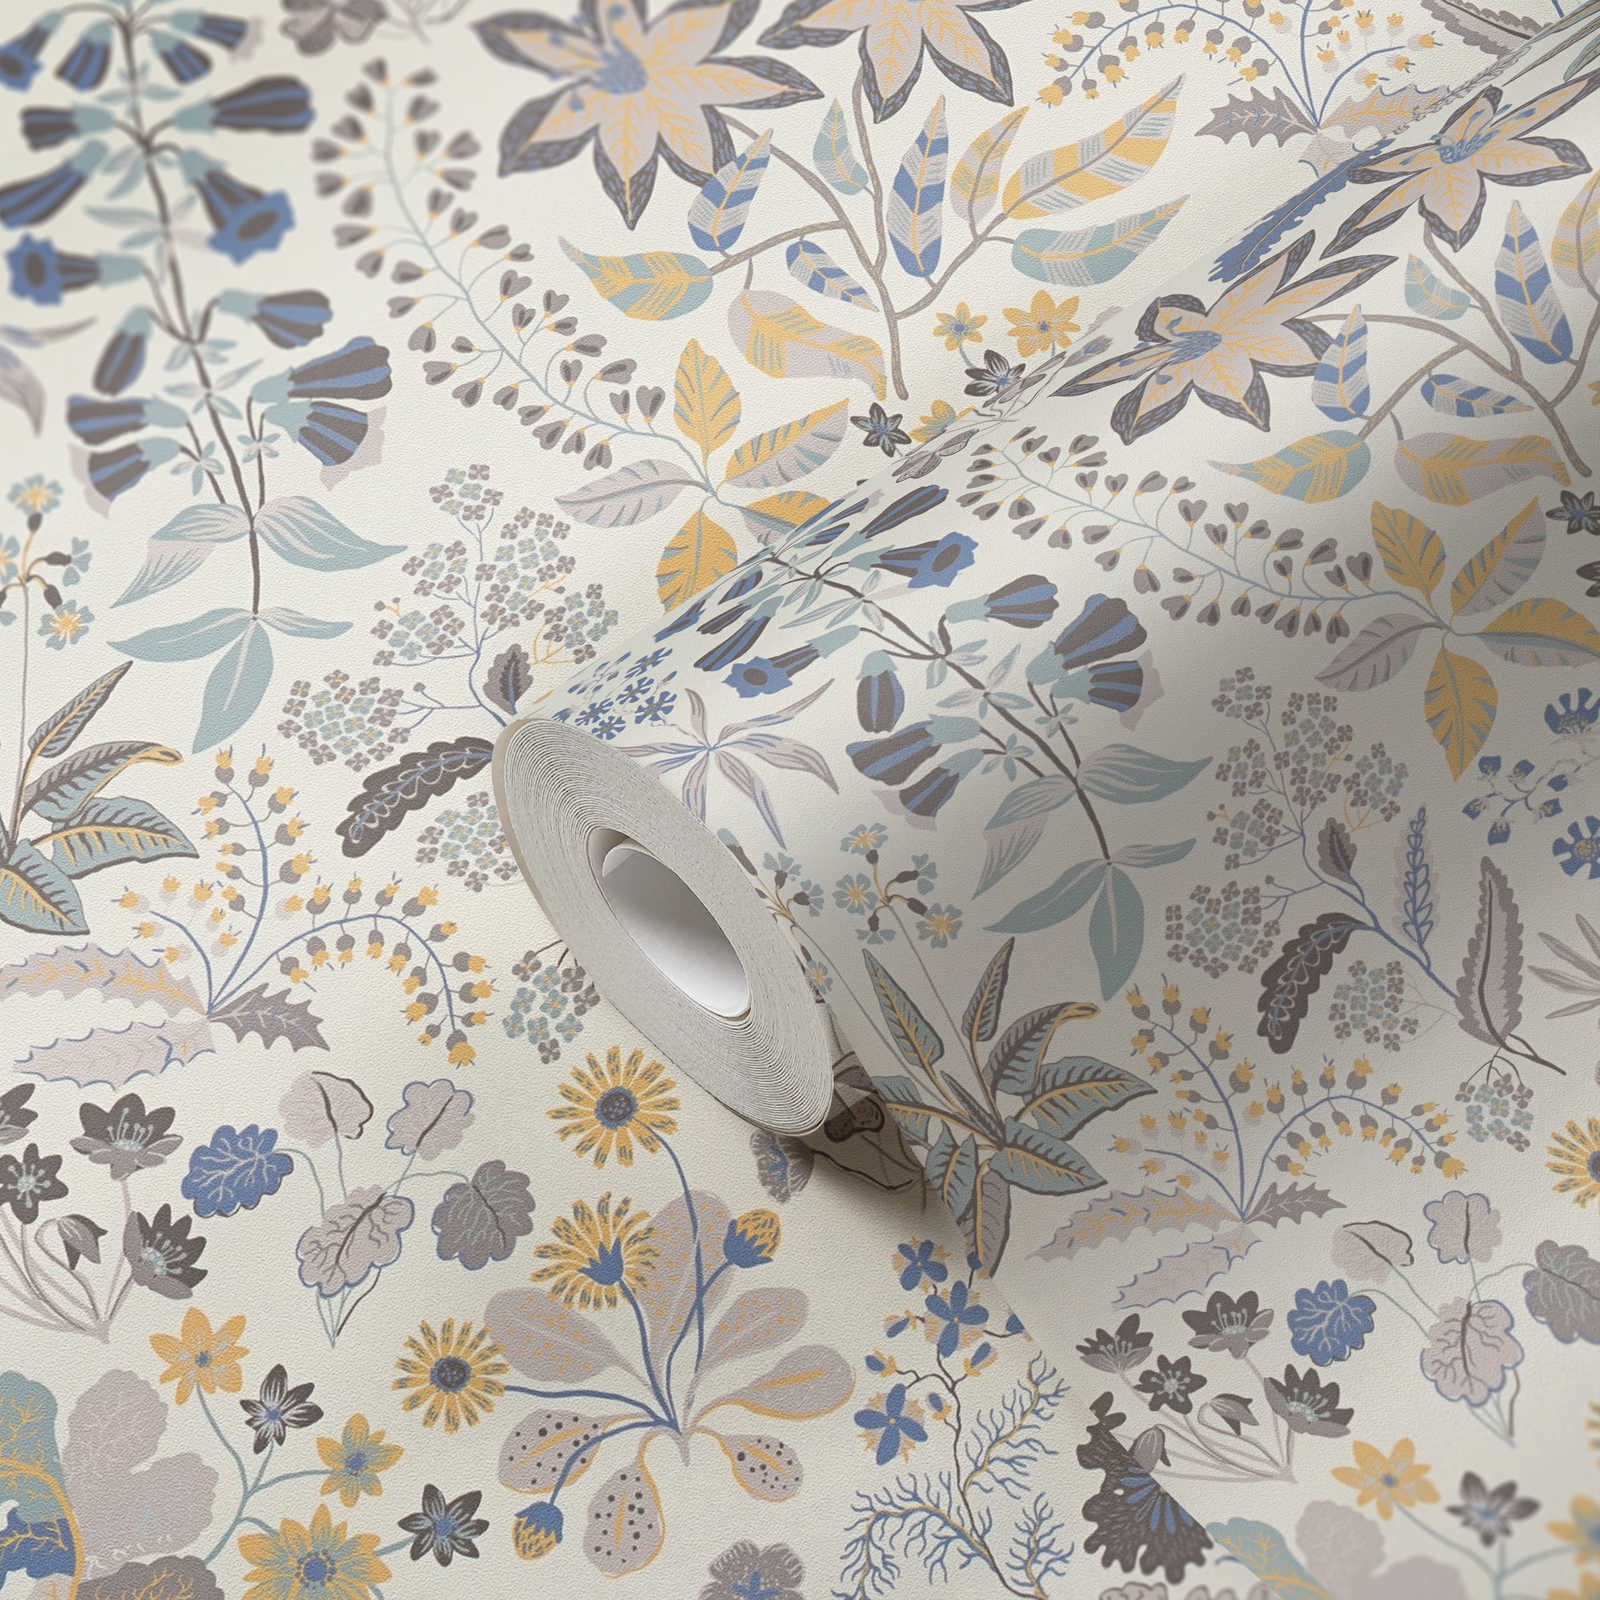             Non-woven wallpaper with detailed floral pattern - grey, blue, cream
        